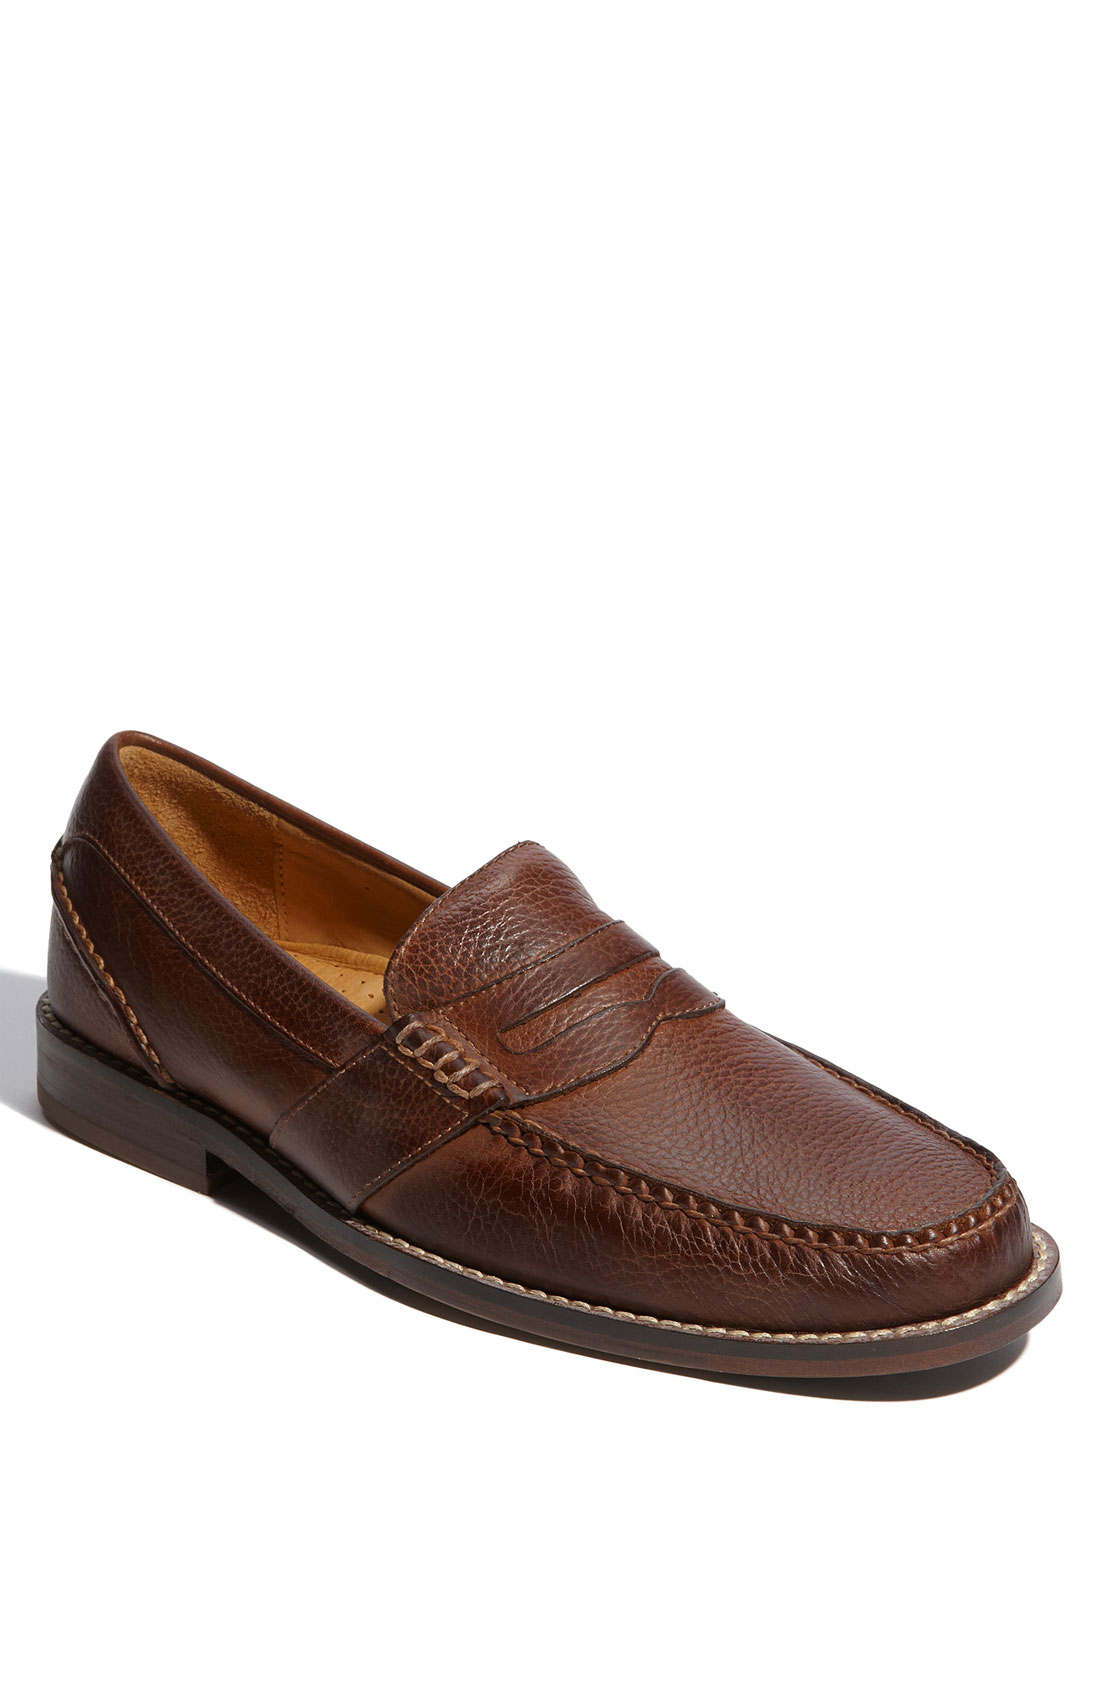 Sperry Top-sider Gold Cup Dress Casual Penny Loafer in Brown for Men ...